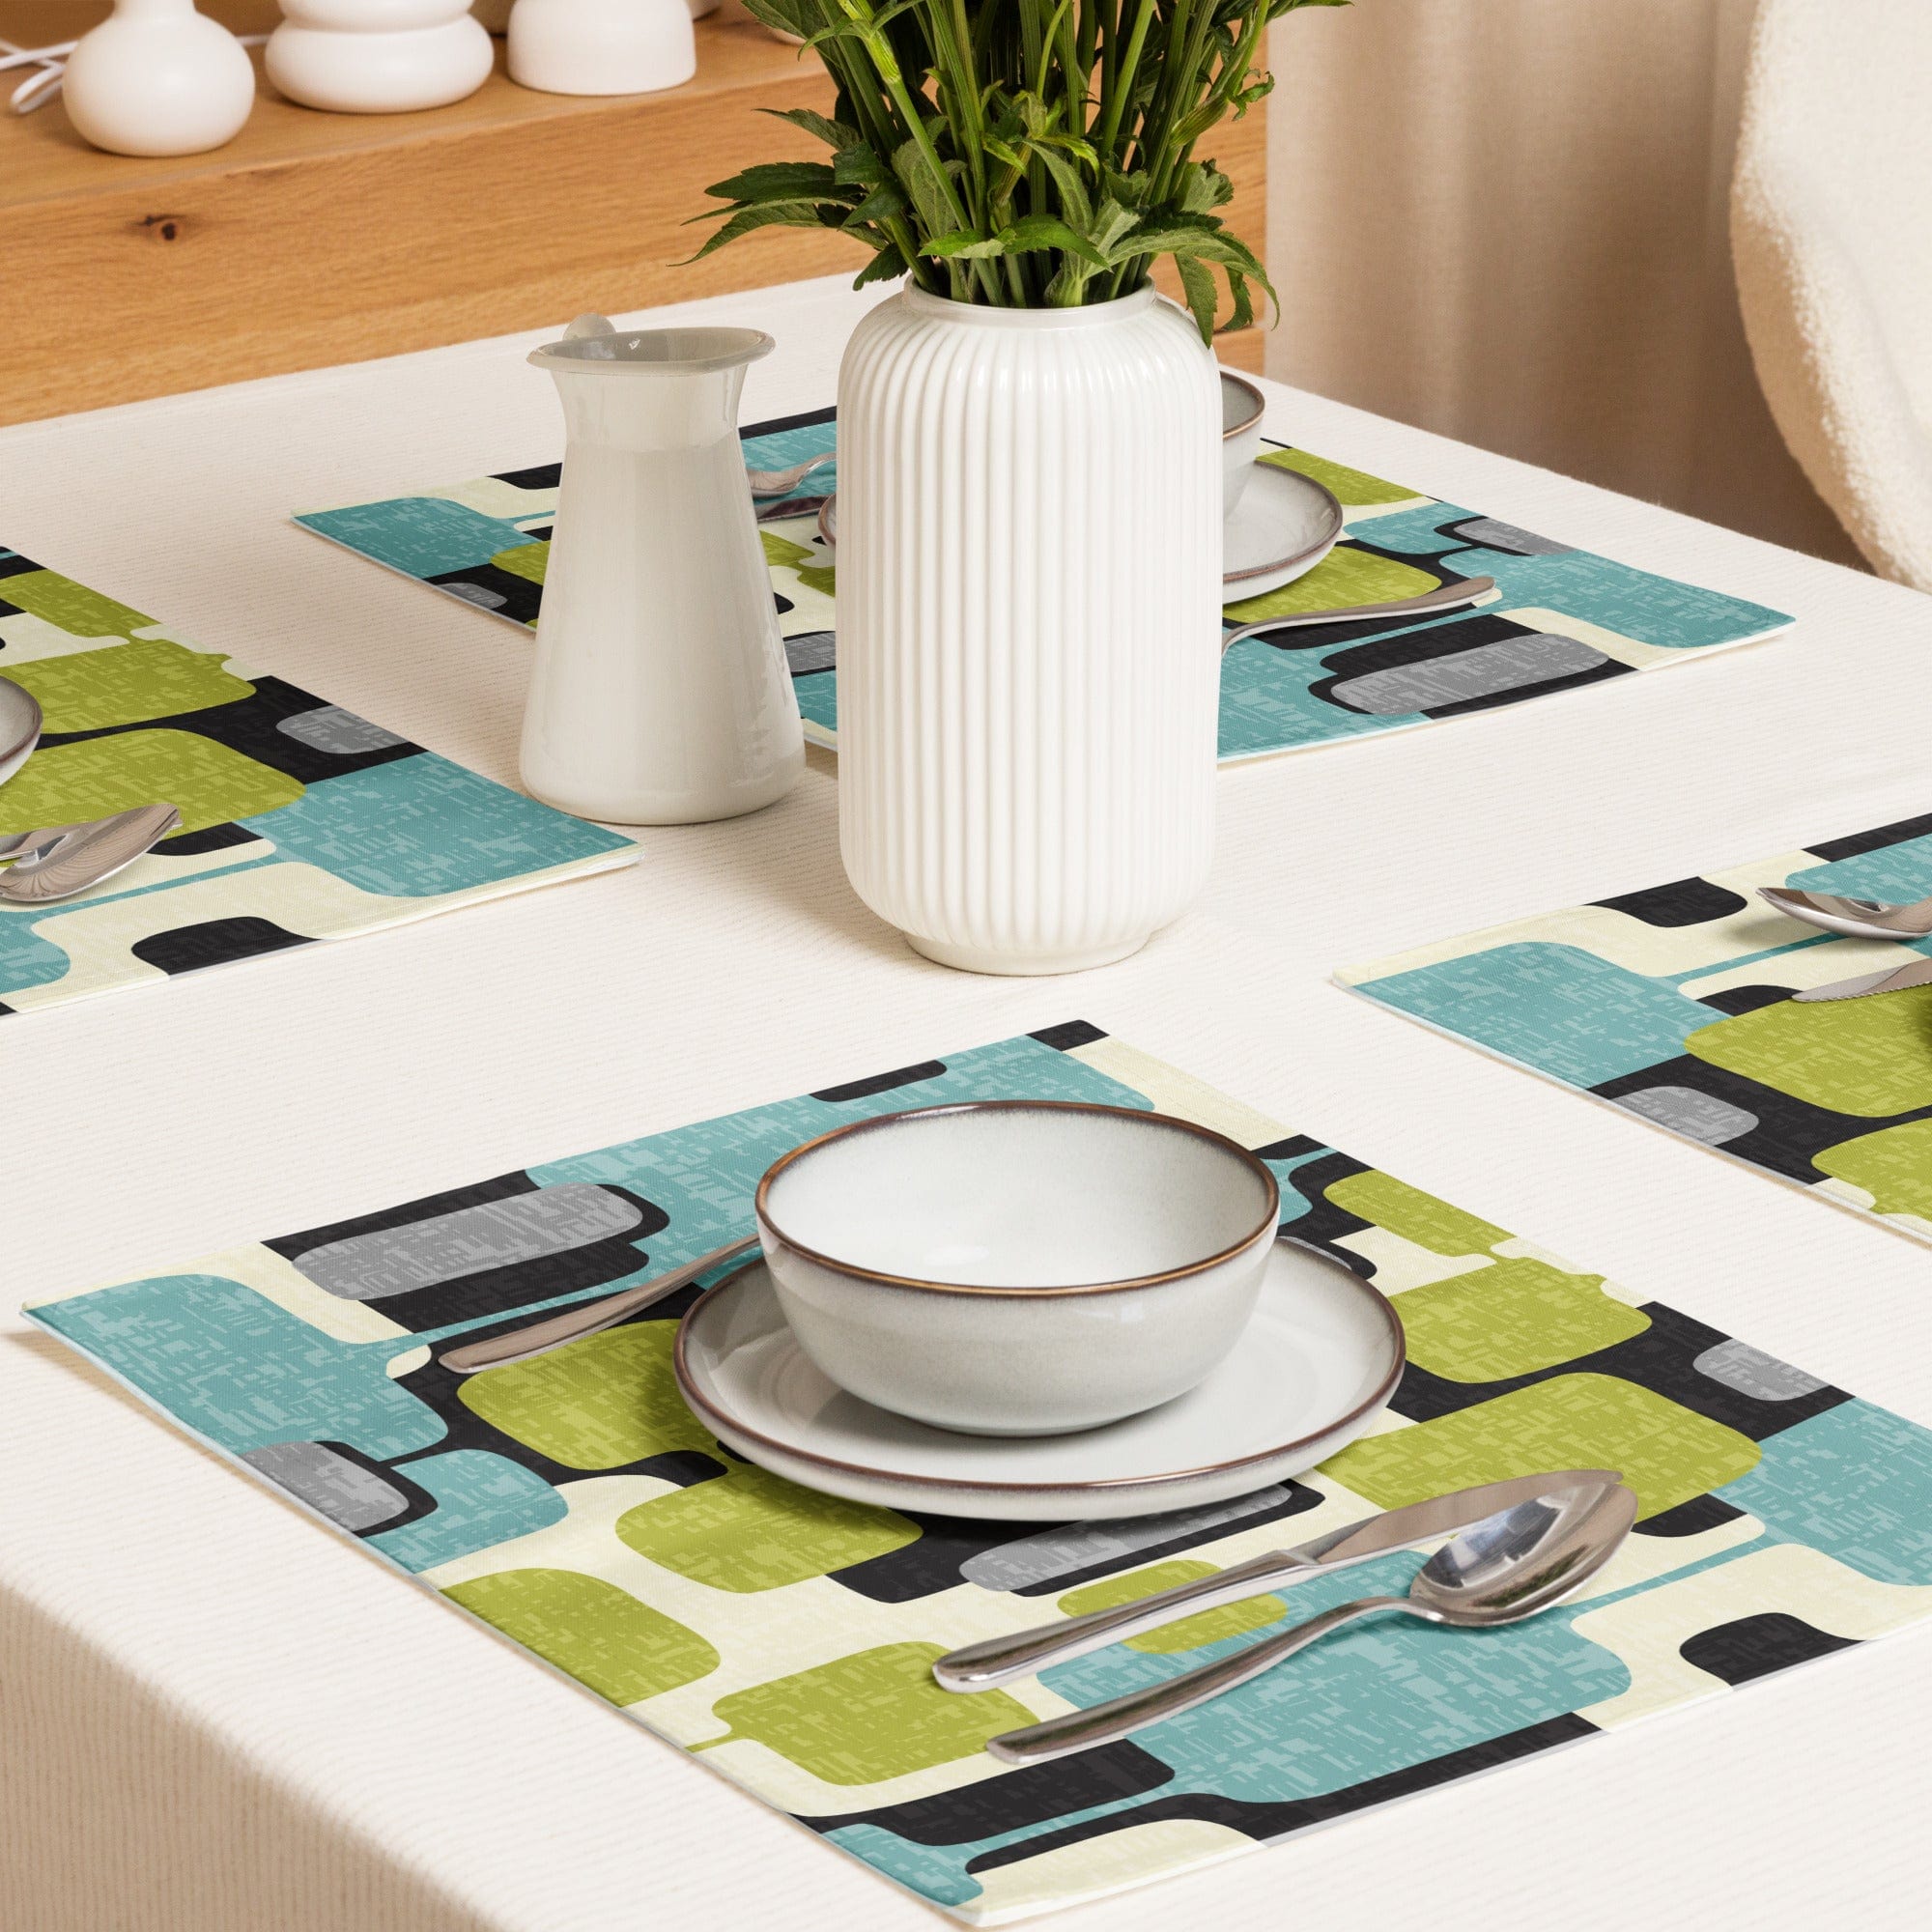 Kate McEnroe New York Mid Century Modern Placemats, Set of 4, MCM 60s Geometric Abstract Table Mats, Retro Dining Linens Placemats 7857804_17484